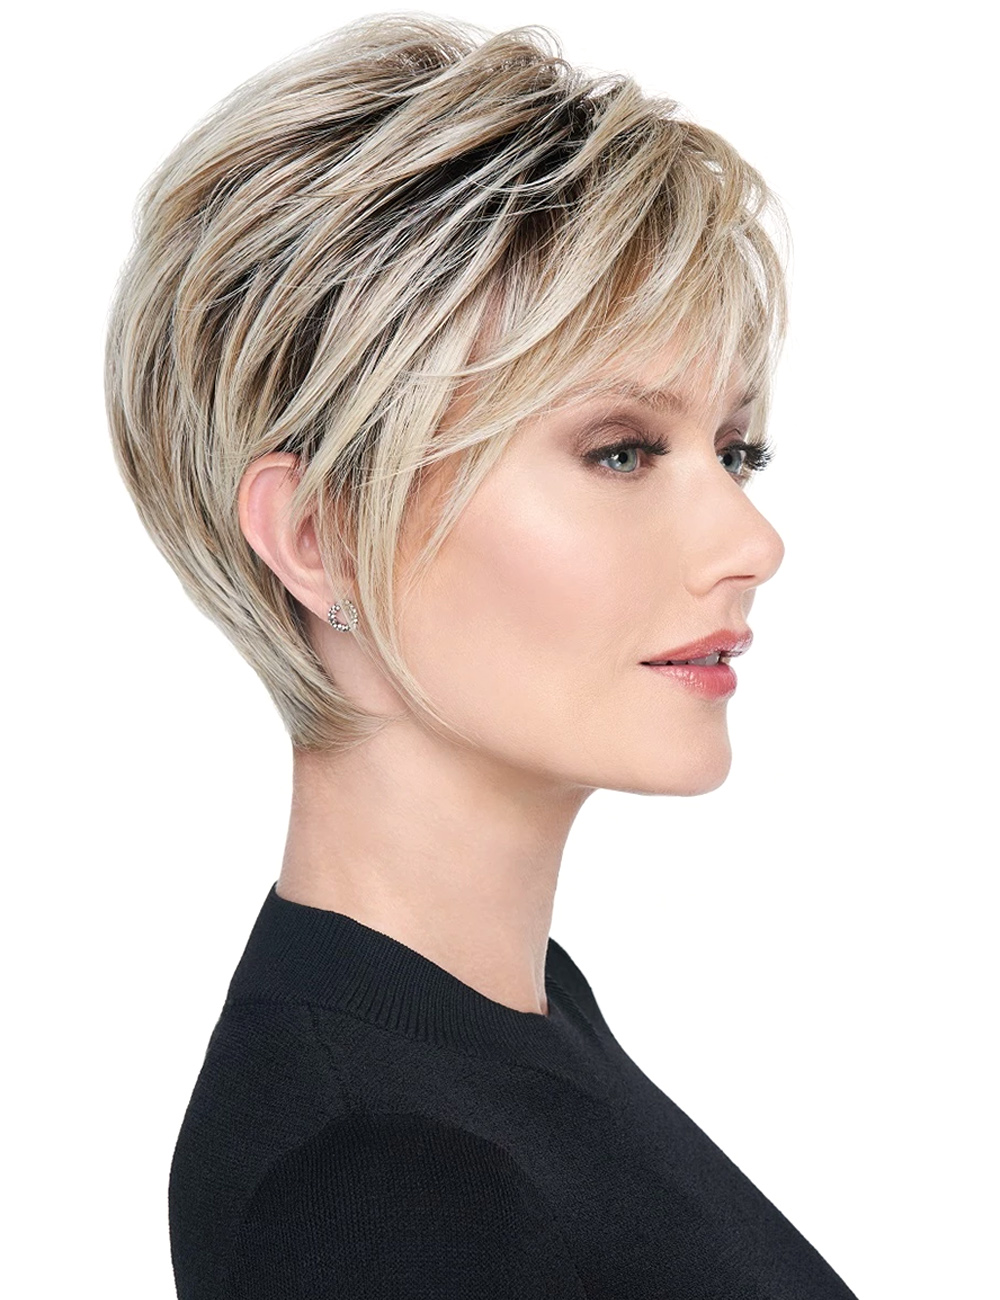 Short Pixie Cut Hairstyle Synthetic Straight Women Wigs 8Inches